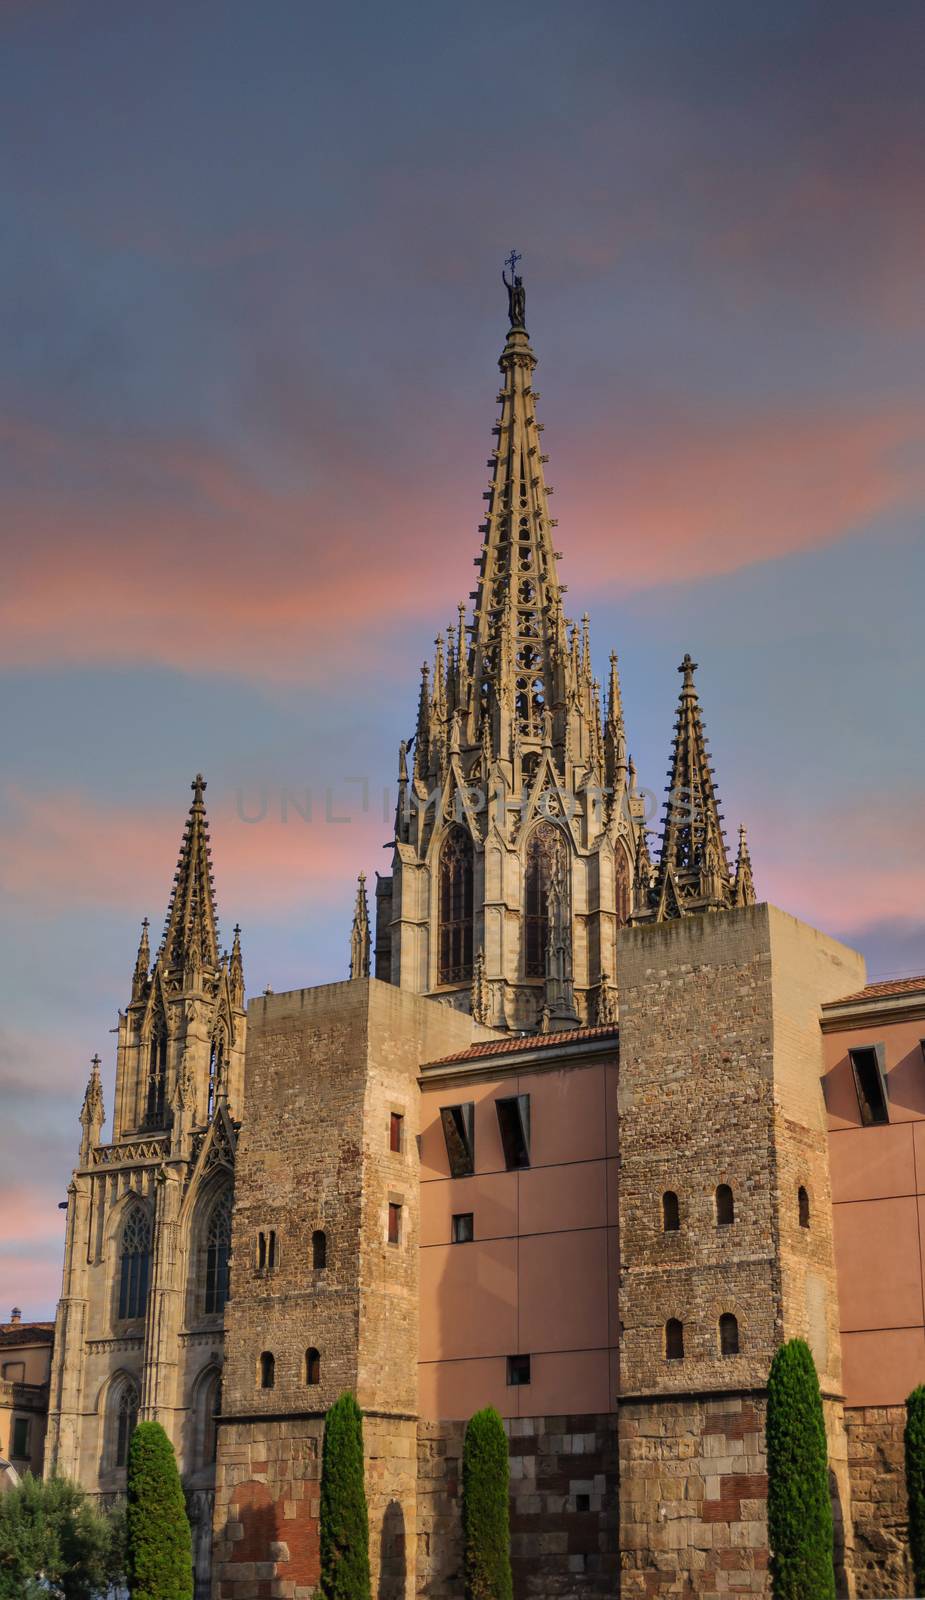 Steeples on Old Gothic Cathedral in Barcelona, Spain